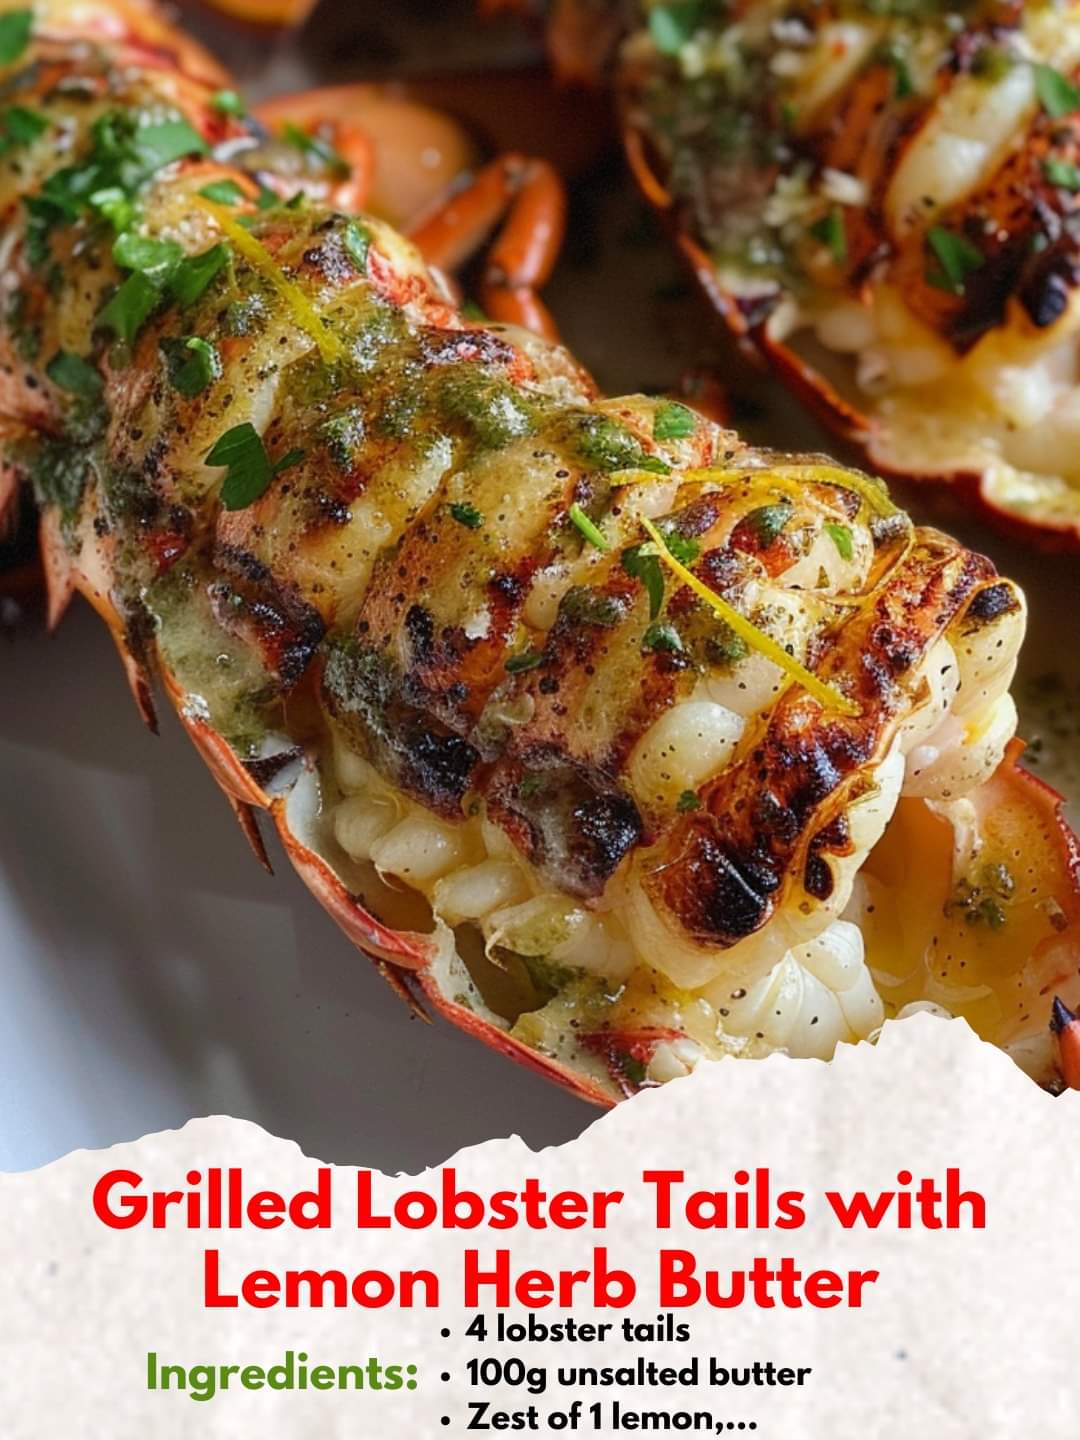 Grilled Lobster Tails with Lemon Herb Butter